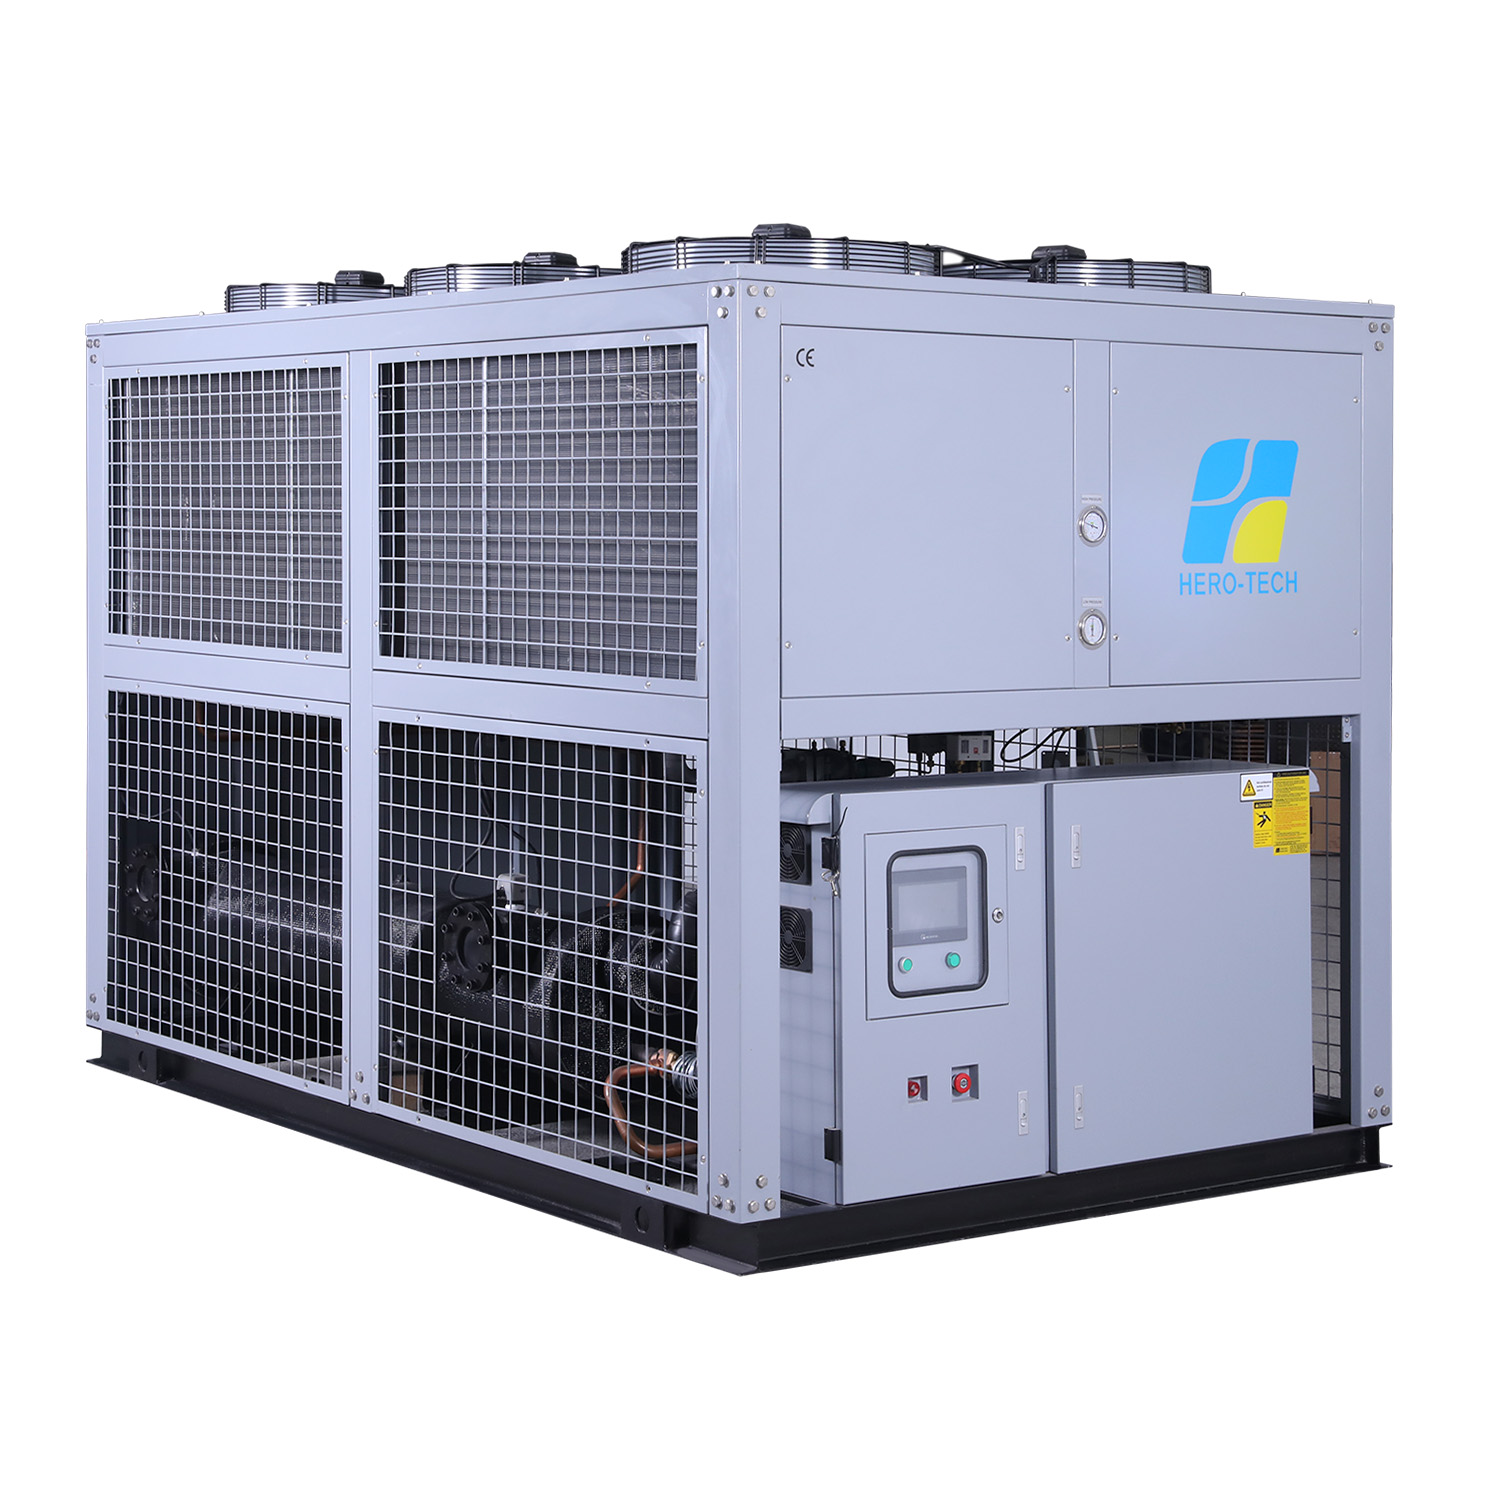 //www.tumblinghills.com/air-cooled-screw-type-chiller.html